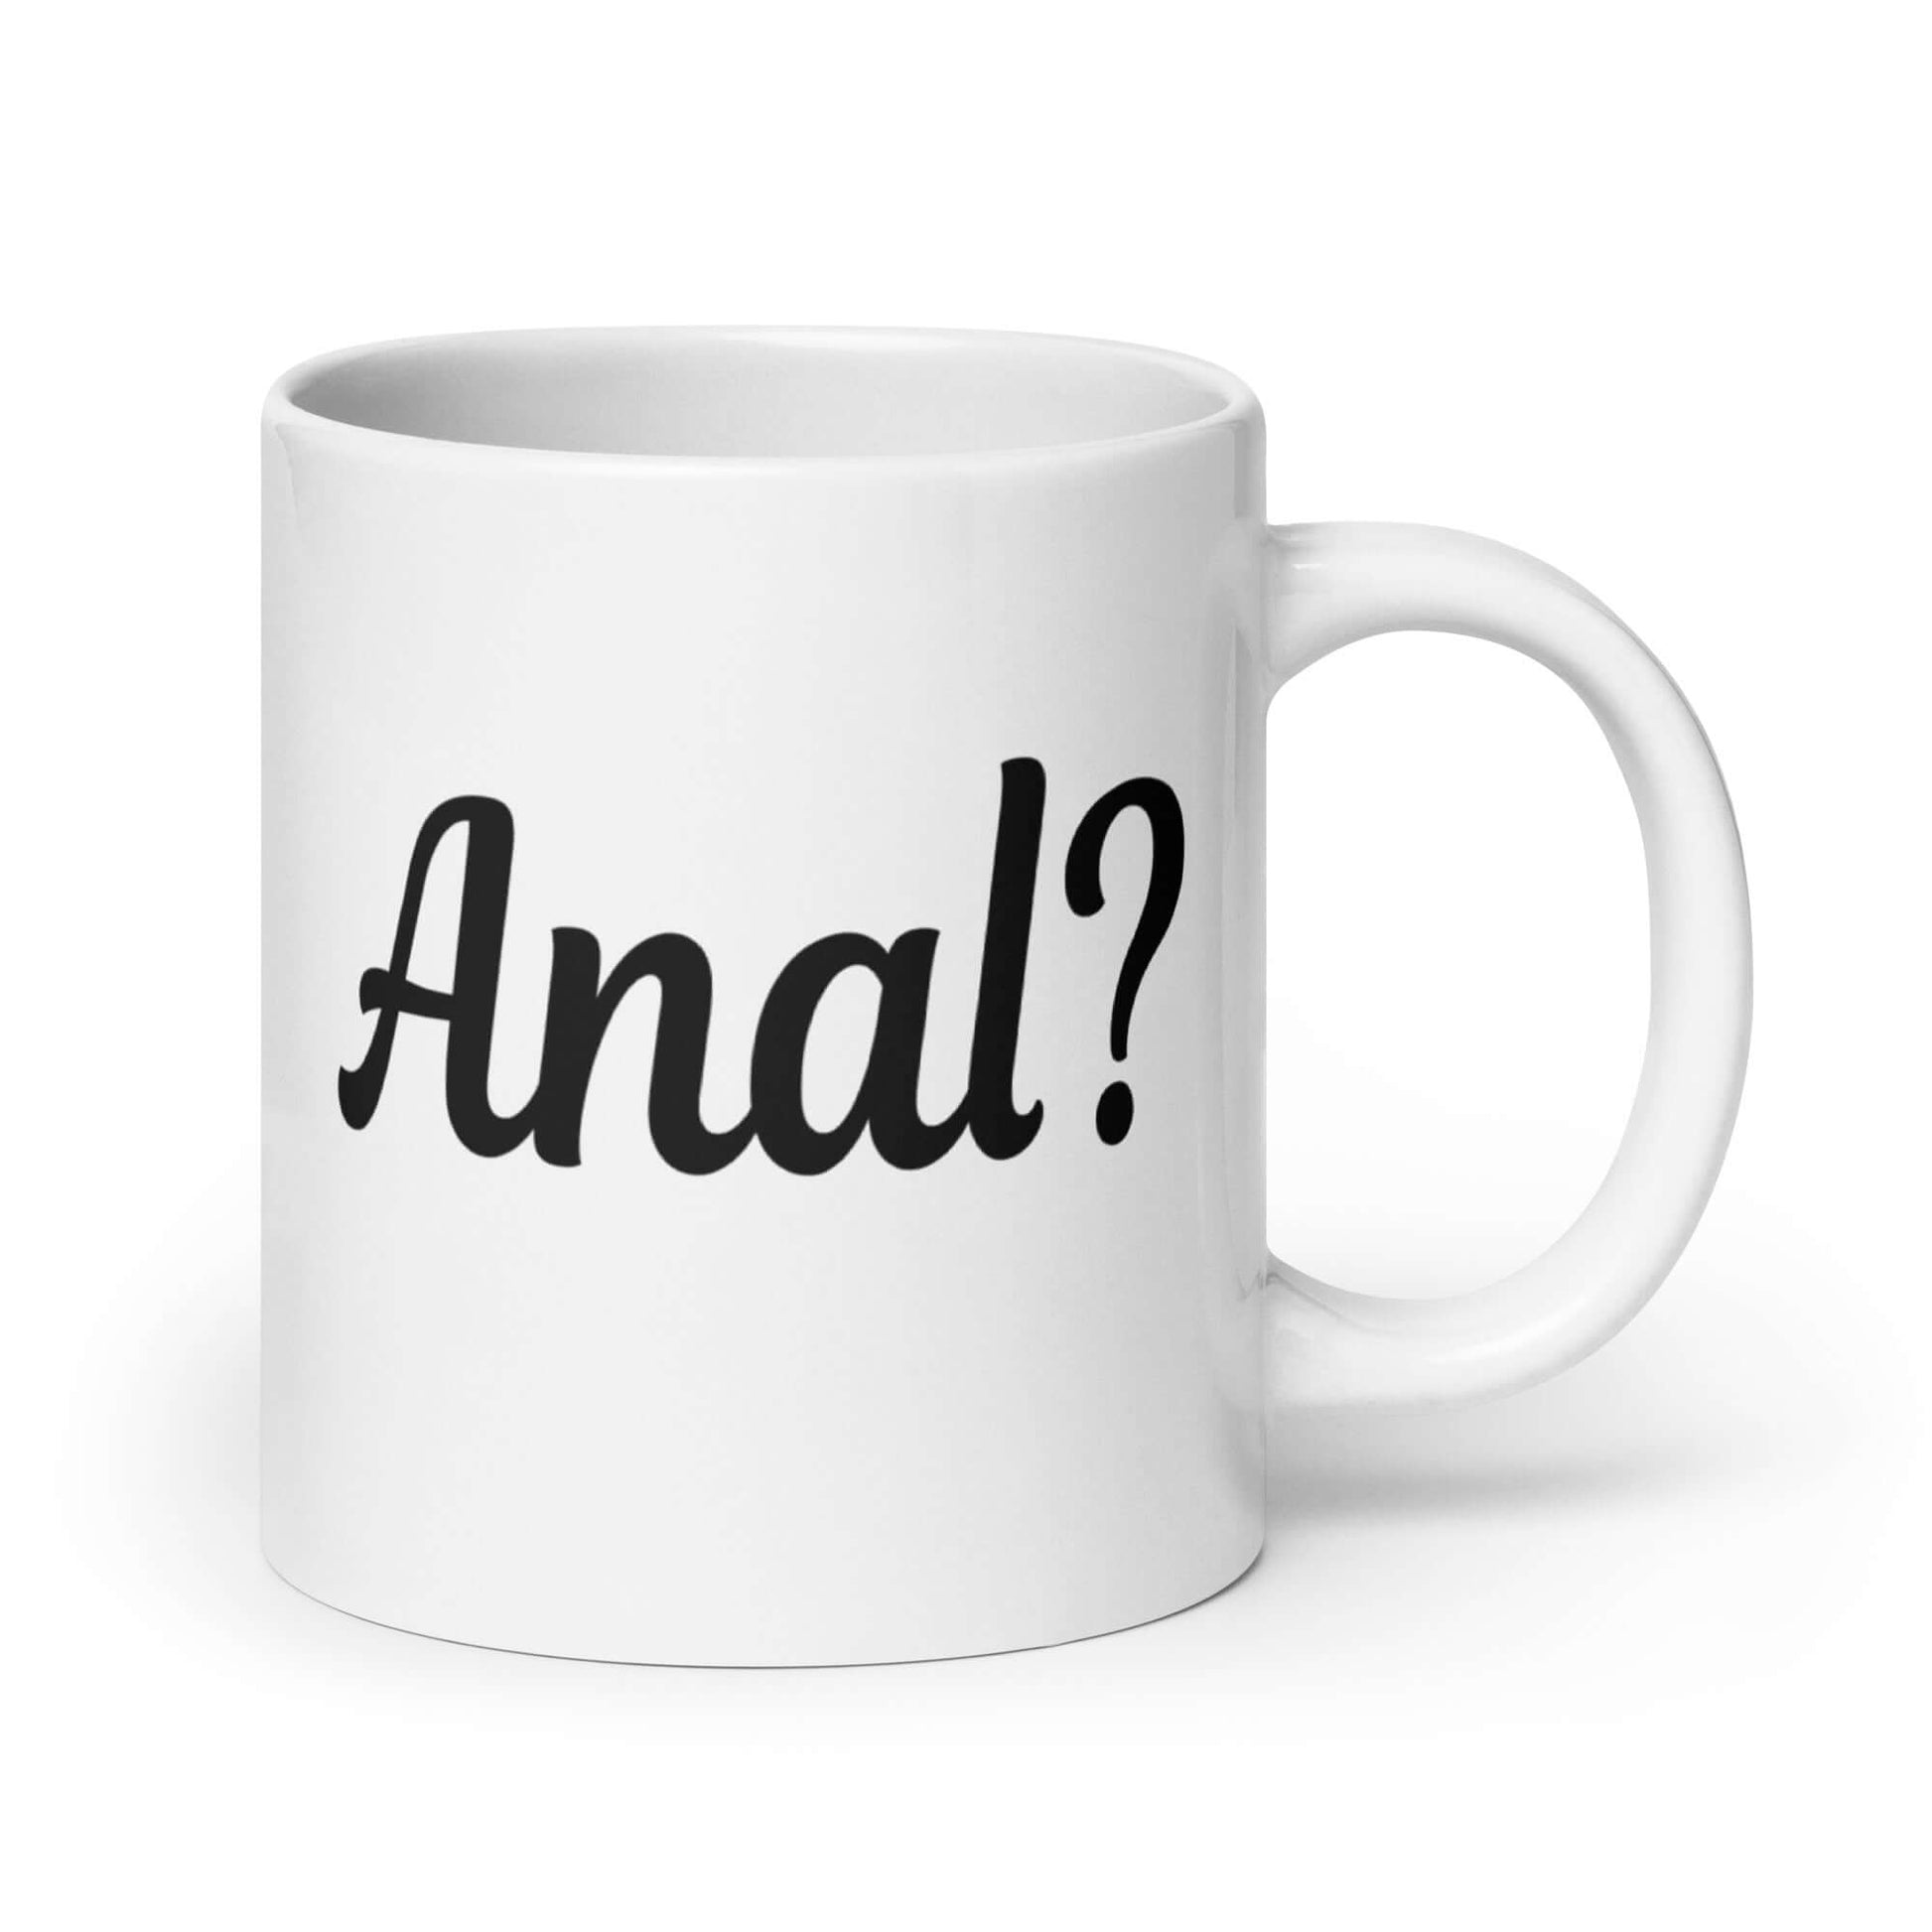 20 ounce ceramic coffee mug that says Anal with a question mark